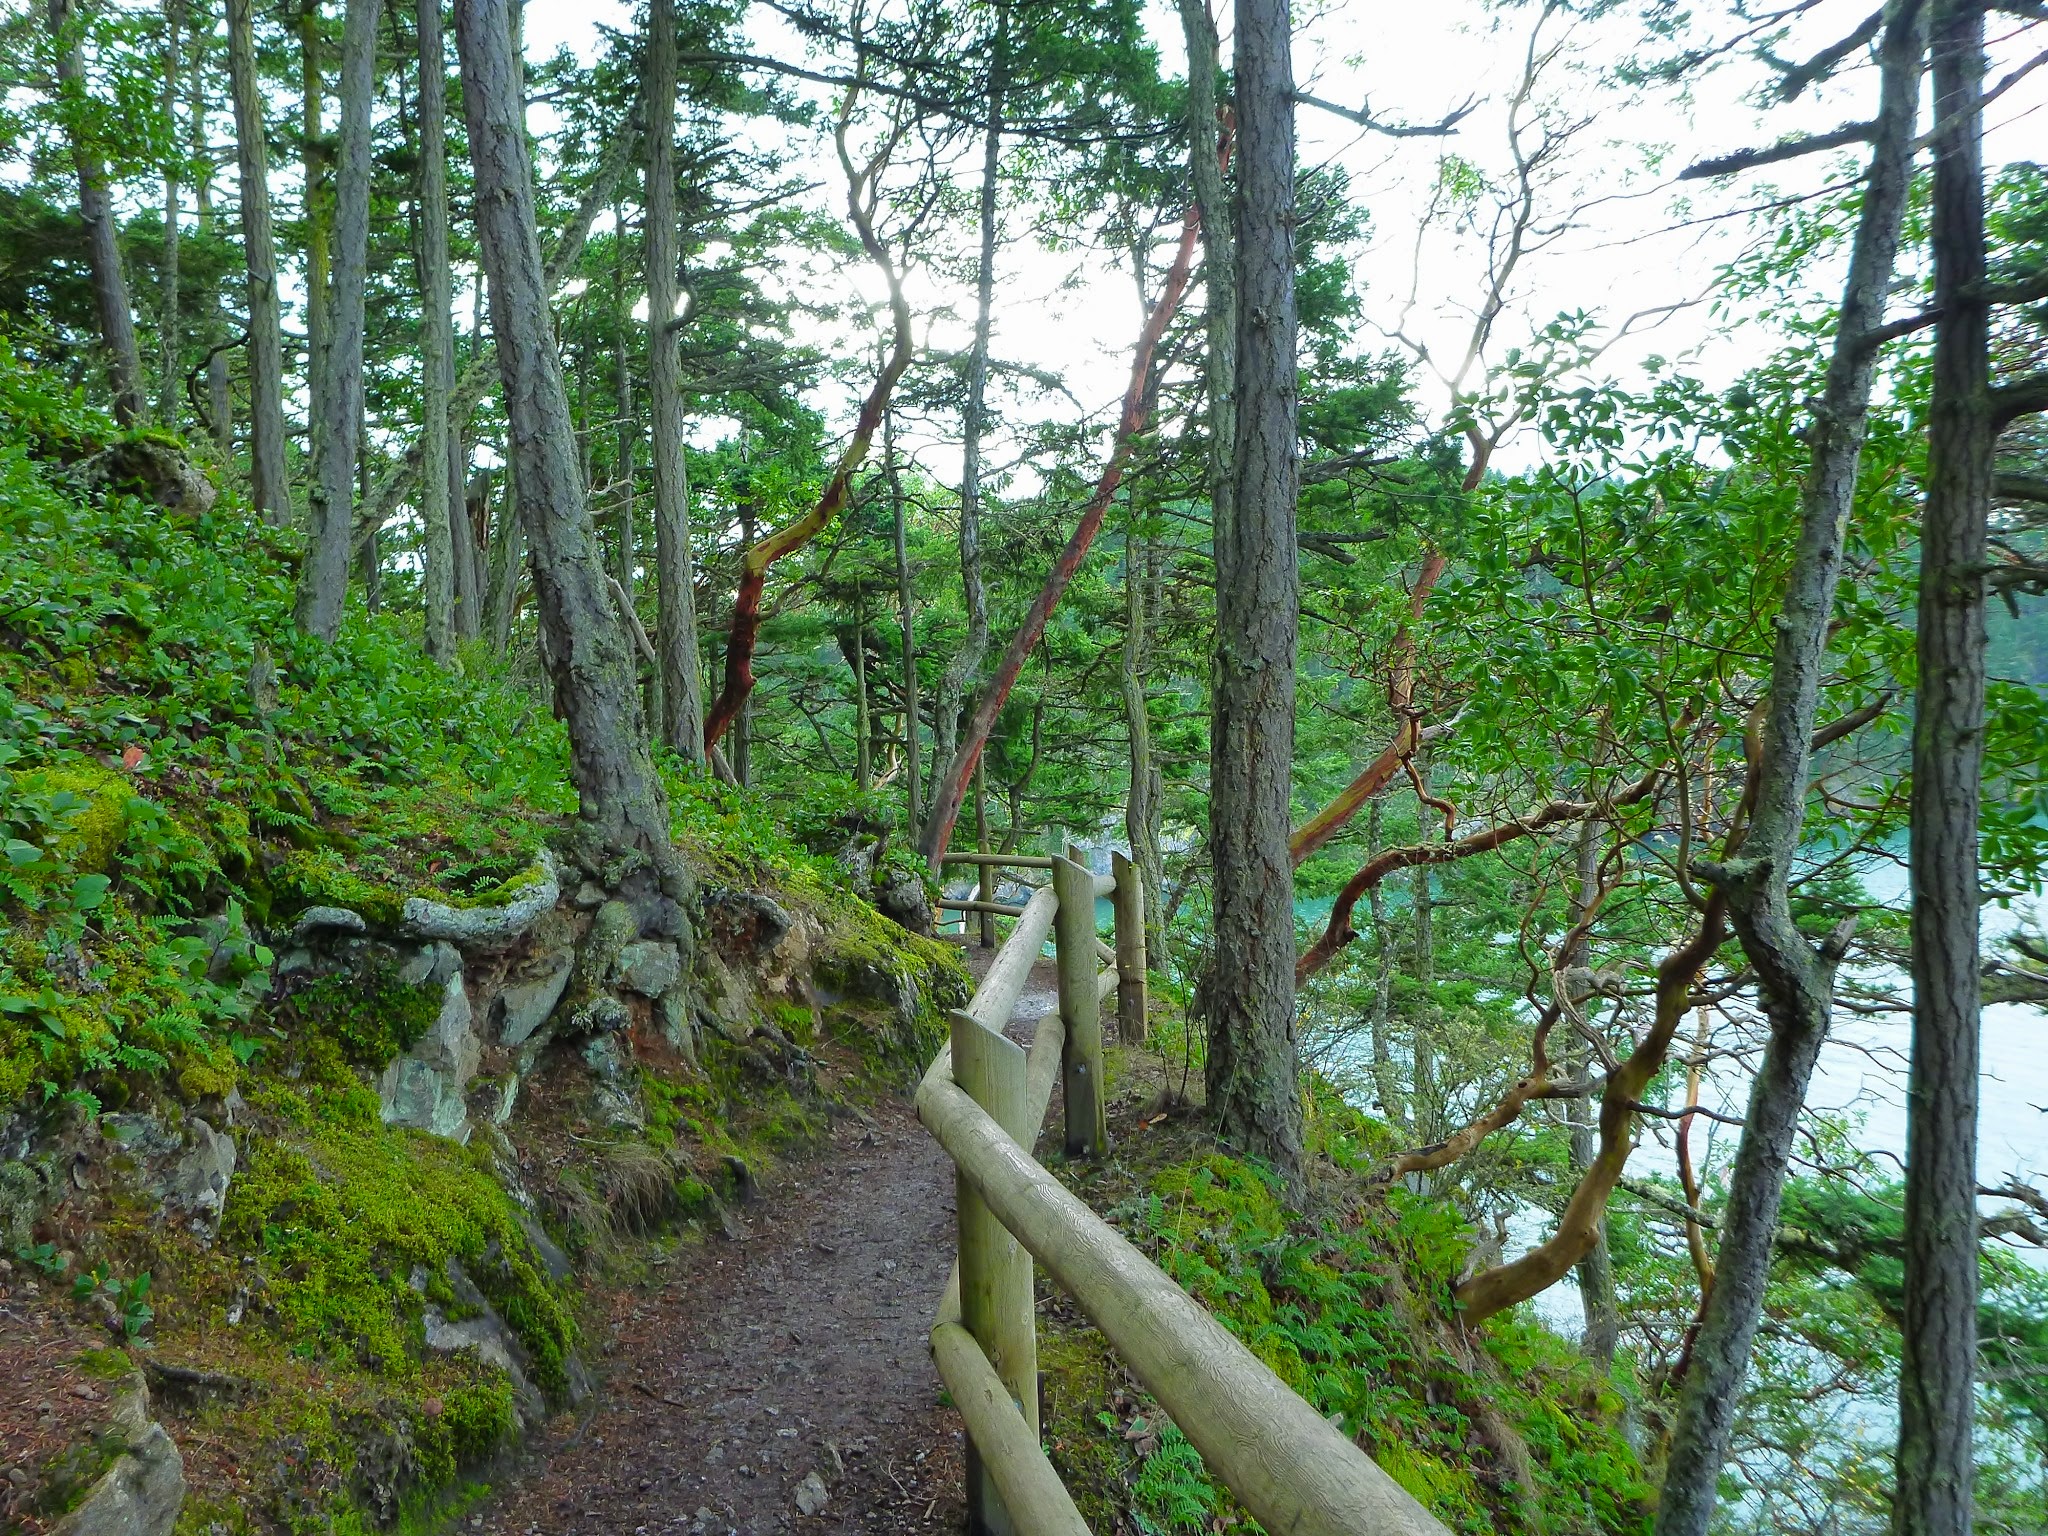 Trees are along the sides of a trail on a bluff. There's a wooden railing and water can be seen through the trees